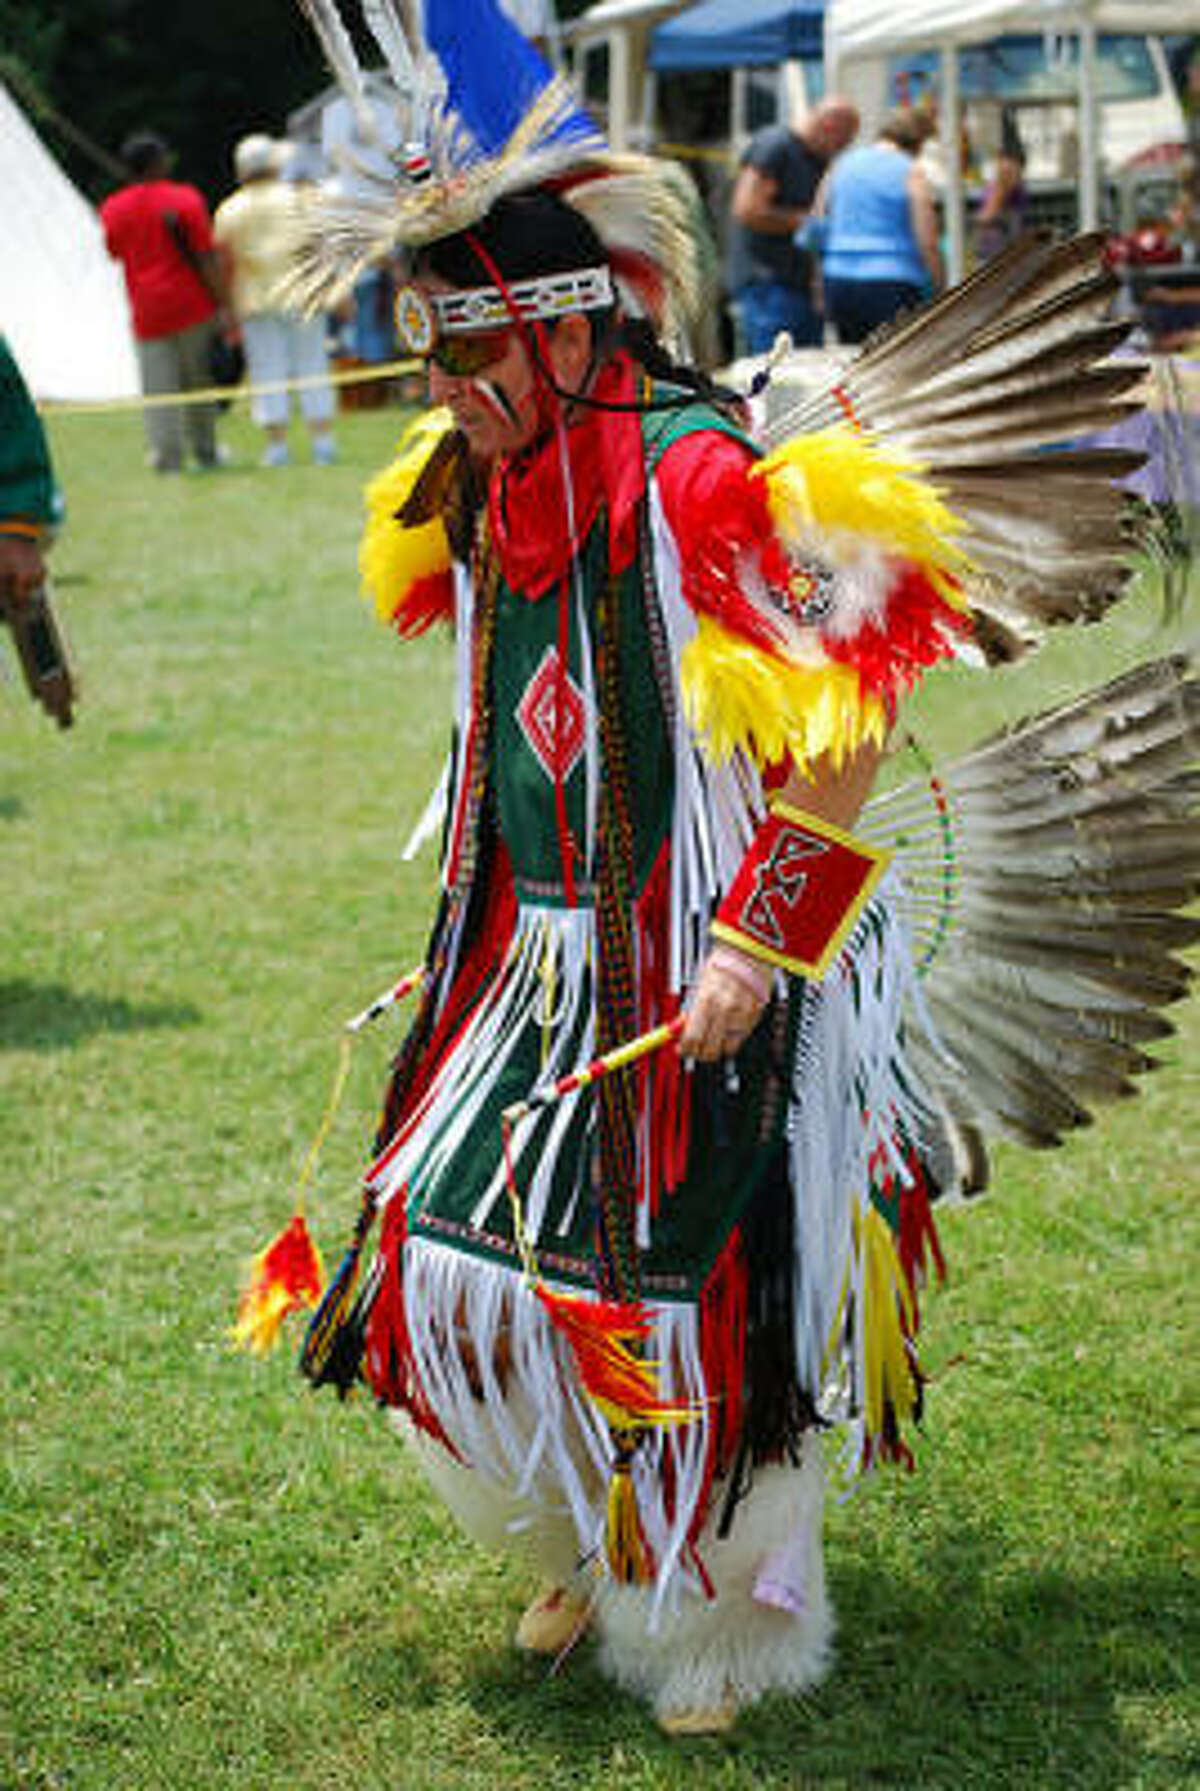 While each tribe had it’s own specific rituals, Native Americans religious tradition were based heavily in ceremonies that involved singing, drumming and fasting. One of the most popular rituals were dances. The most widely celebrated was the Sundance It represented a connection between life and death and the regeneration of the Earth for many Native Americans, It lasts from four to eight days starting at the sunset of the final day of preparation and ending at sunset. A piercing ritual was often incorporated into the ceremony. Seen here is a Native American performing an Intertribal dance.